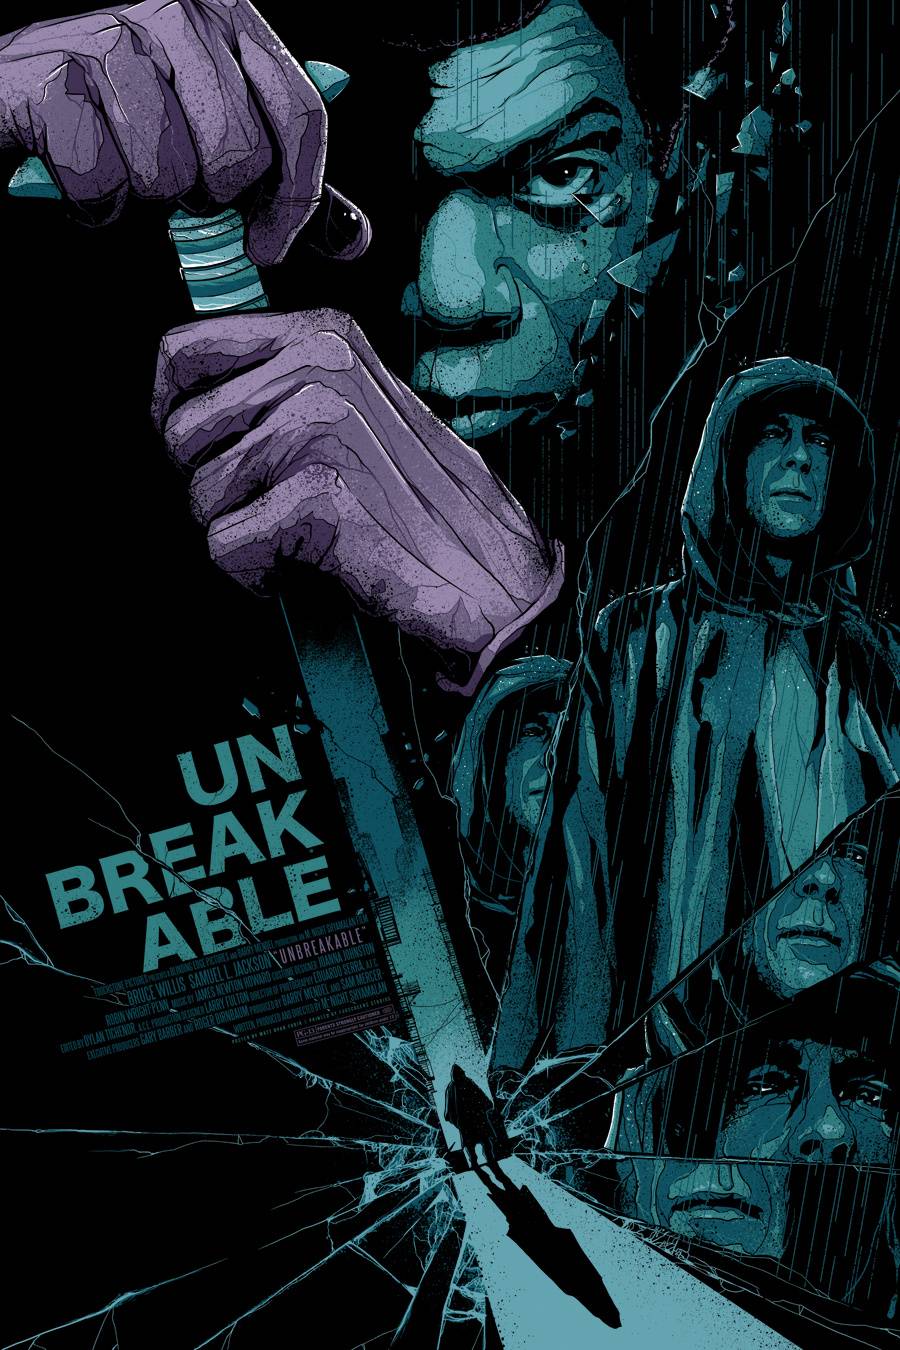 Unbreakable movie poster